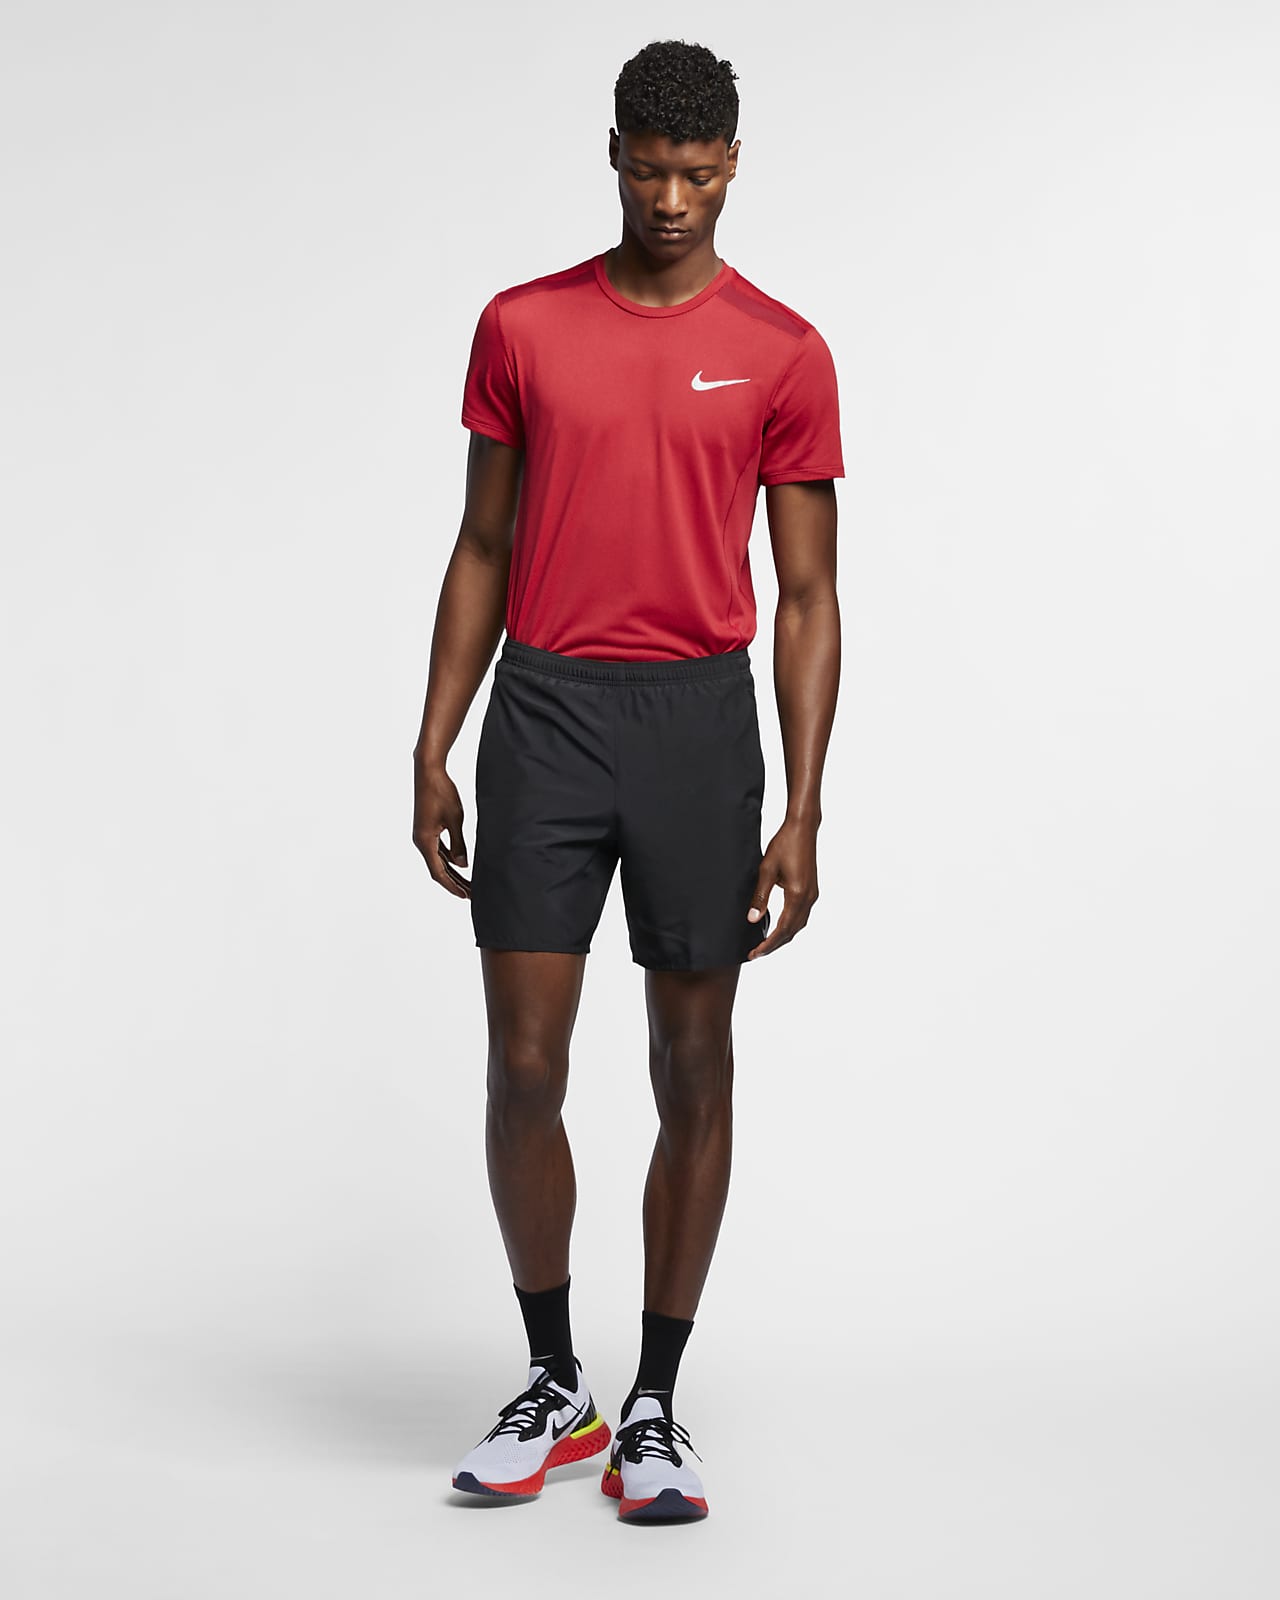 nike challenger 7 2 in 1 shorts